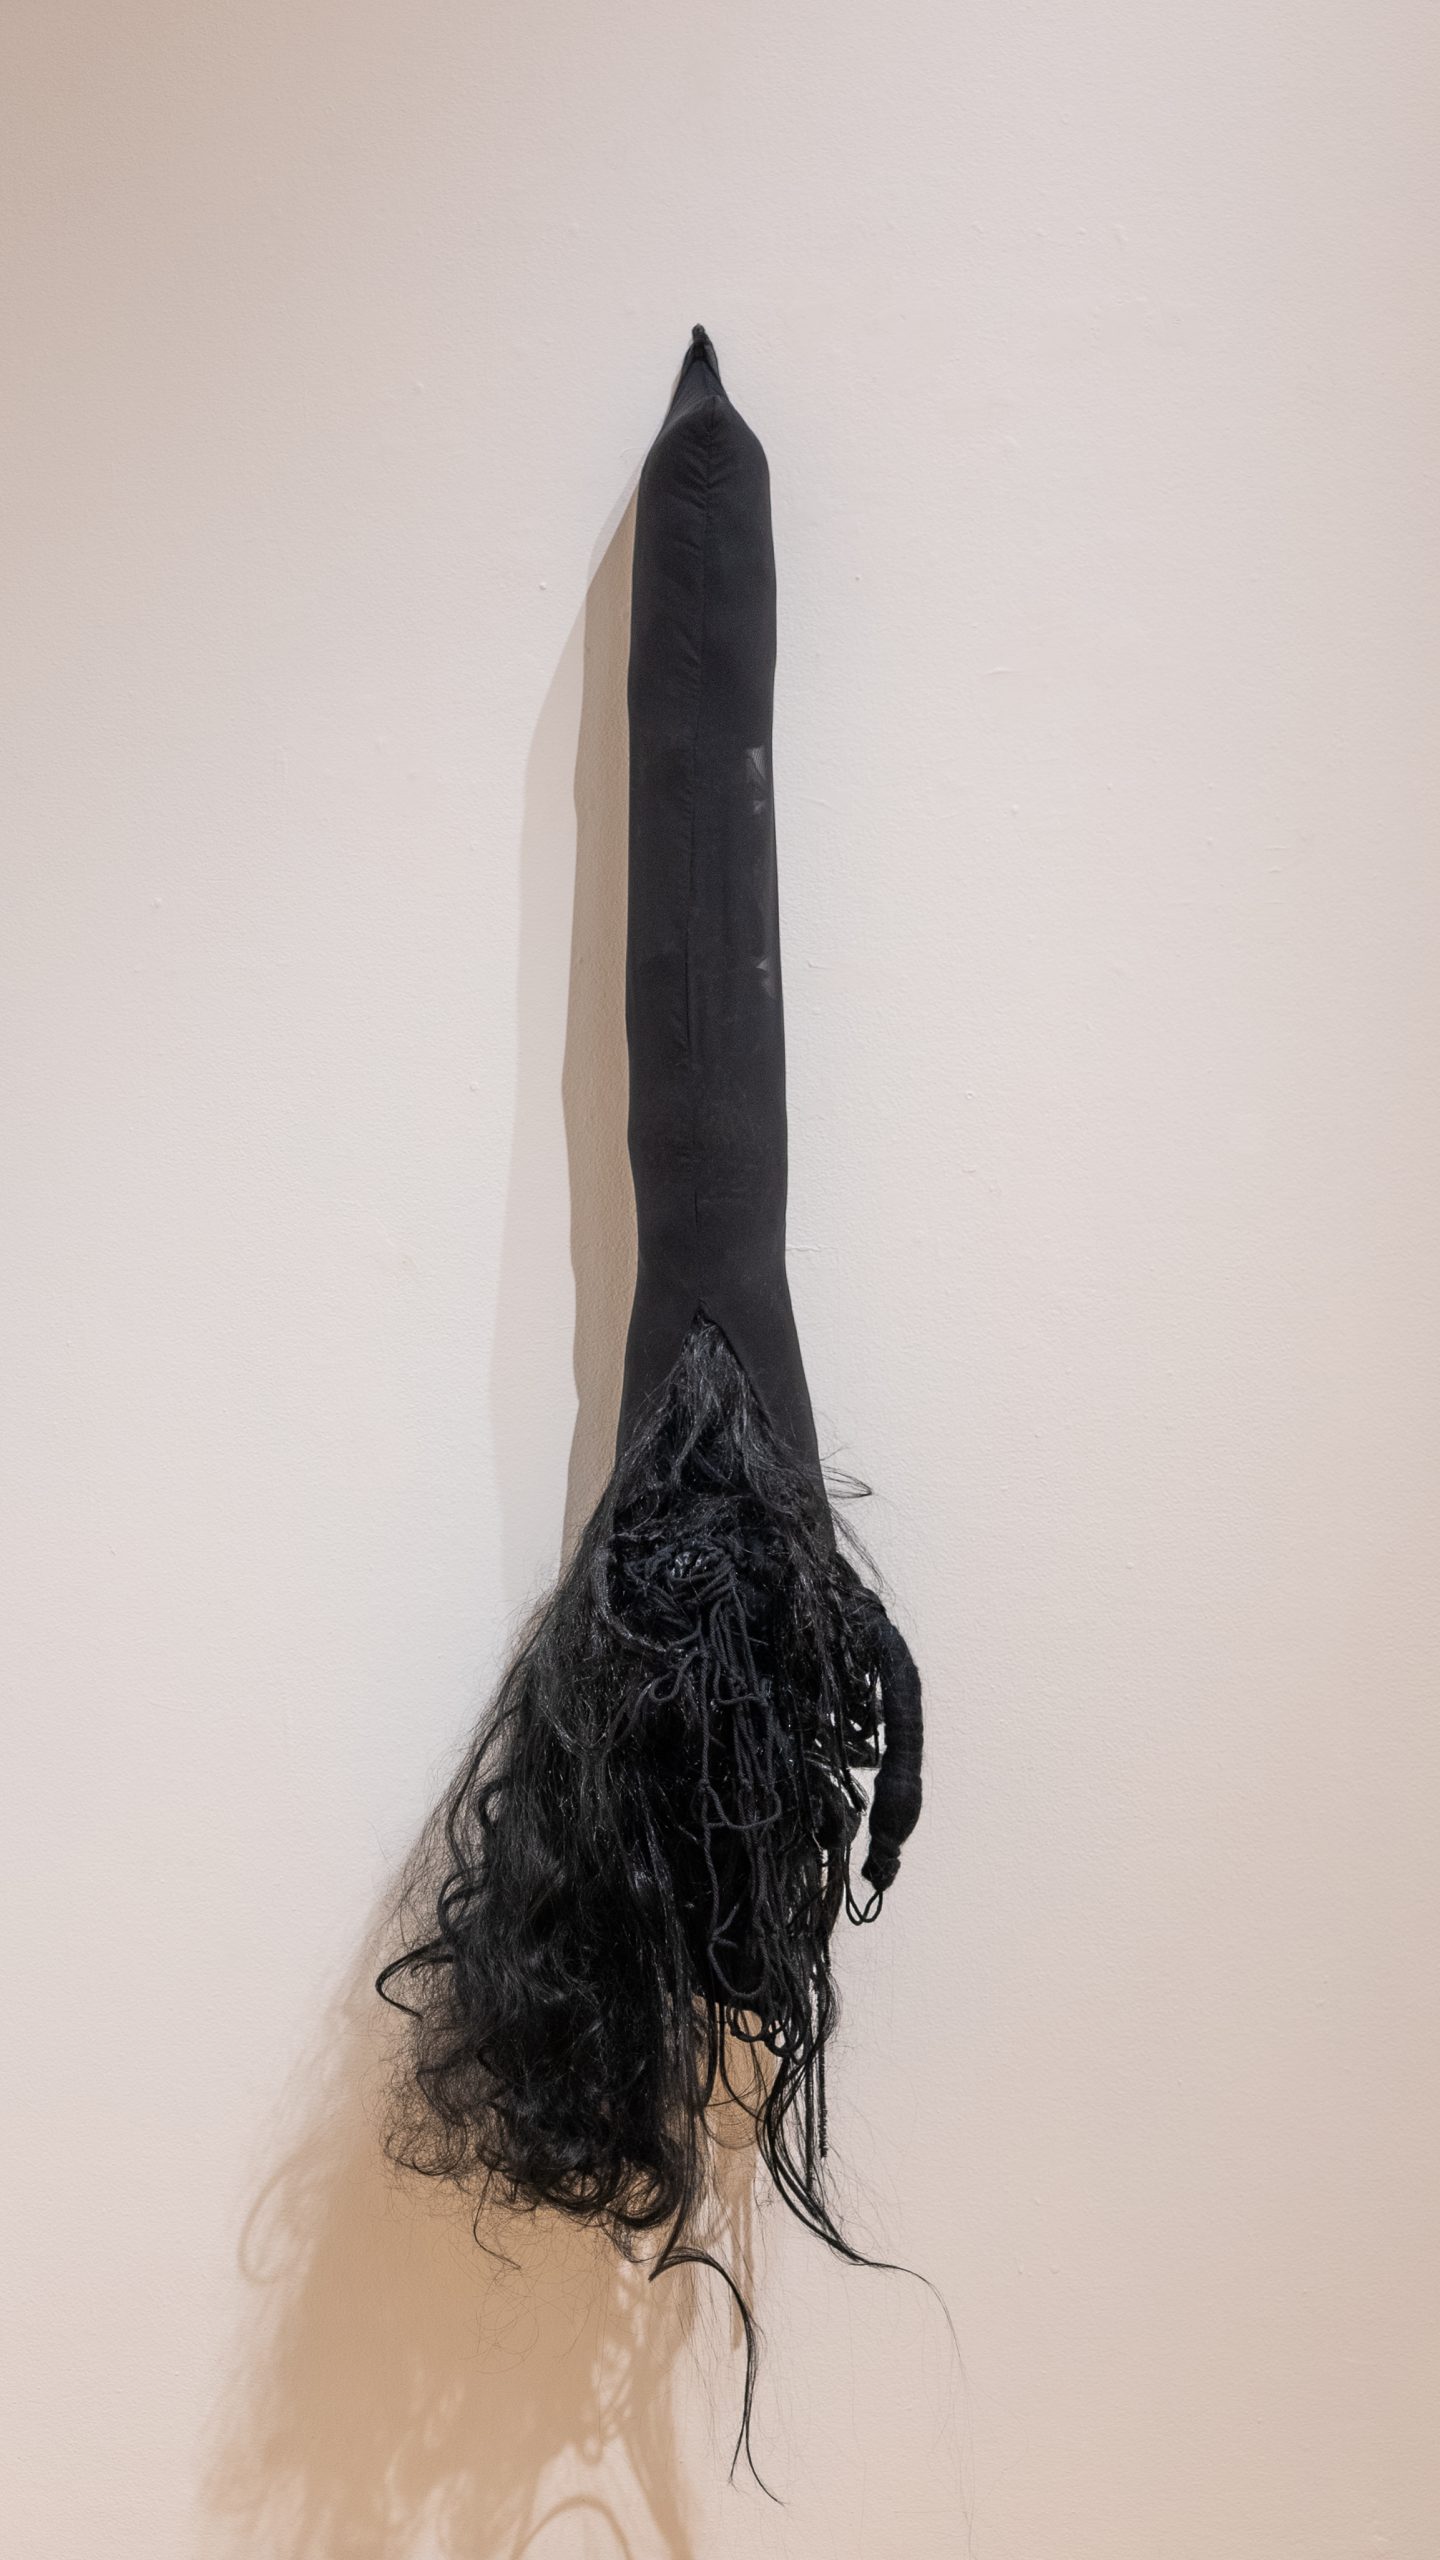 Veronica A. Perez, "splayed," 2023. Fabric, artificial hair, 66 in. tall x 16 in. wide x 11 in. deep. Part of shadow / echo / memory, University of Southern Maine Art Gallery, 2023.